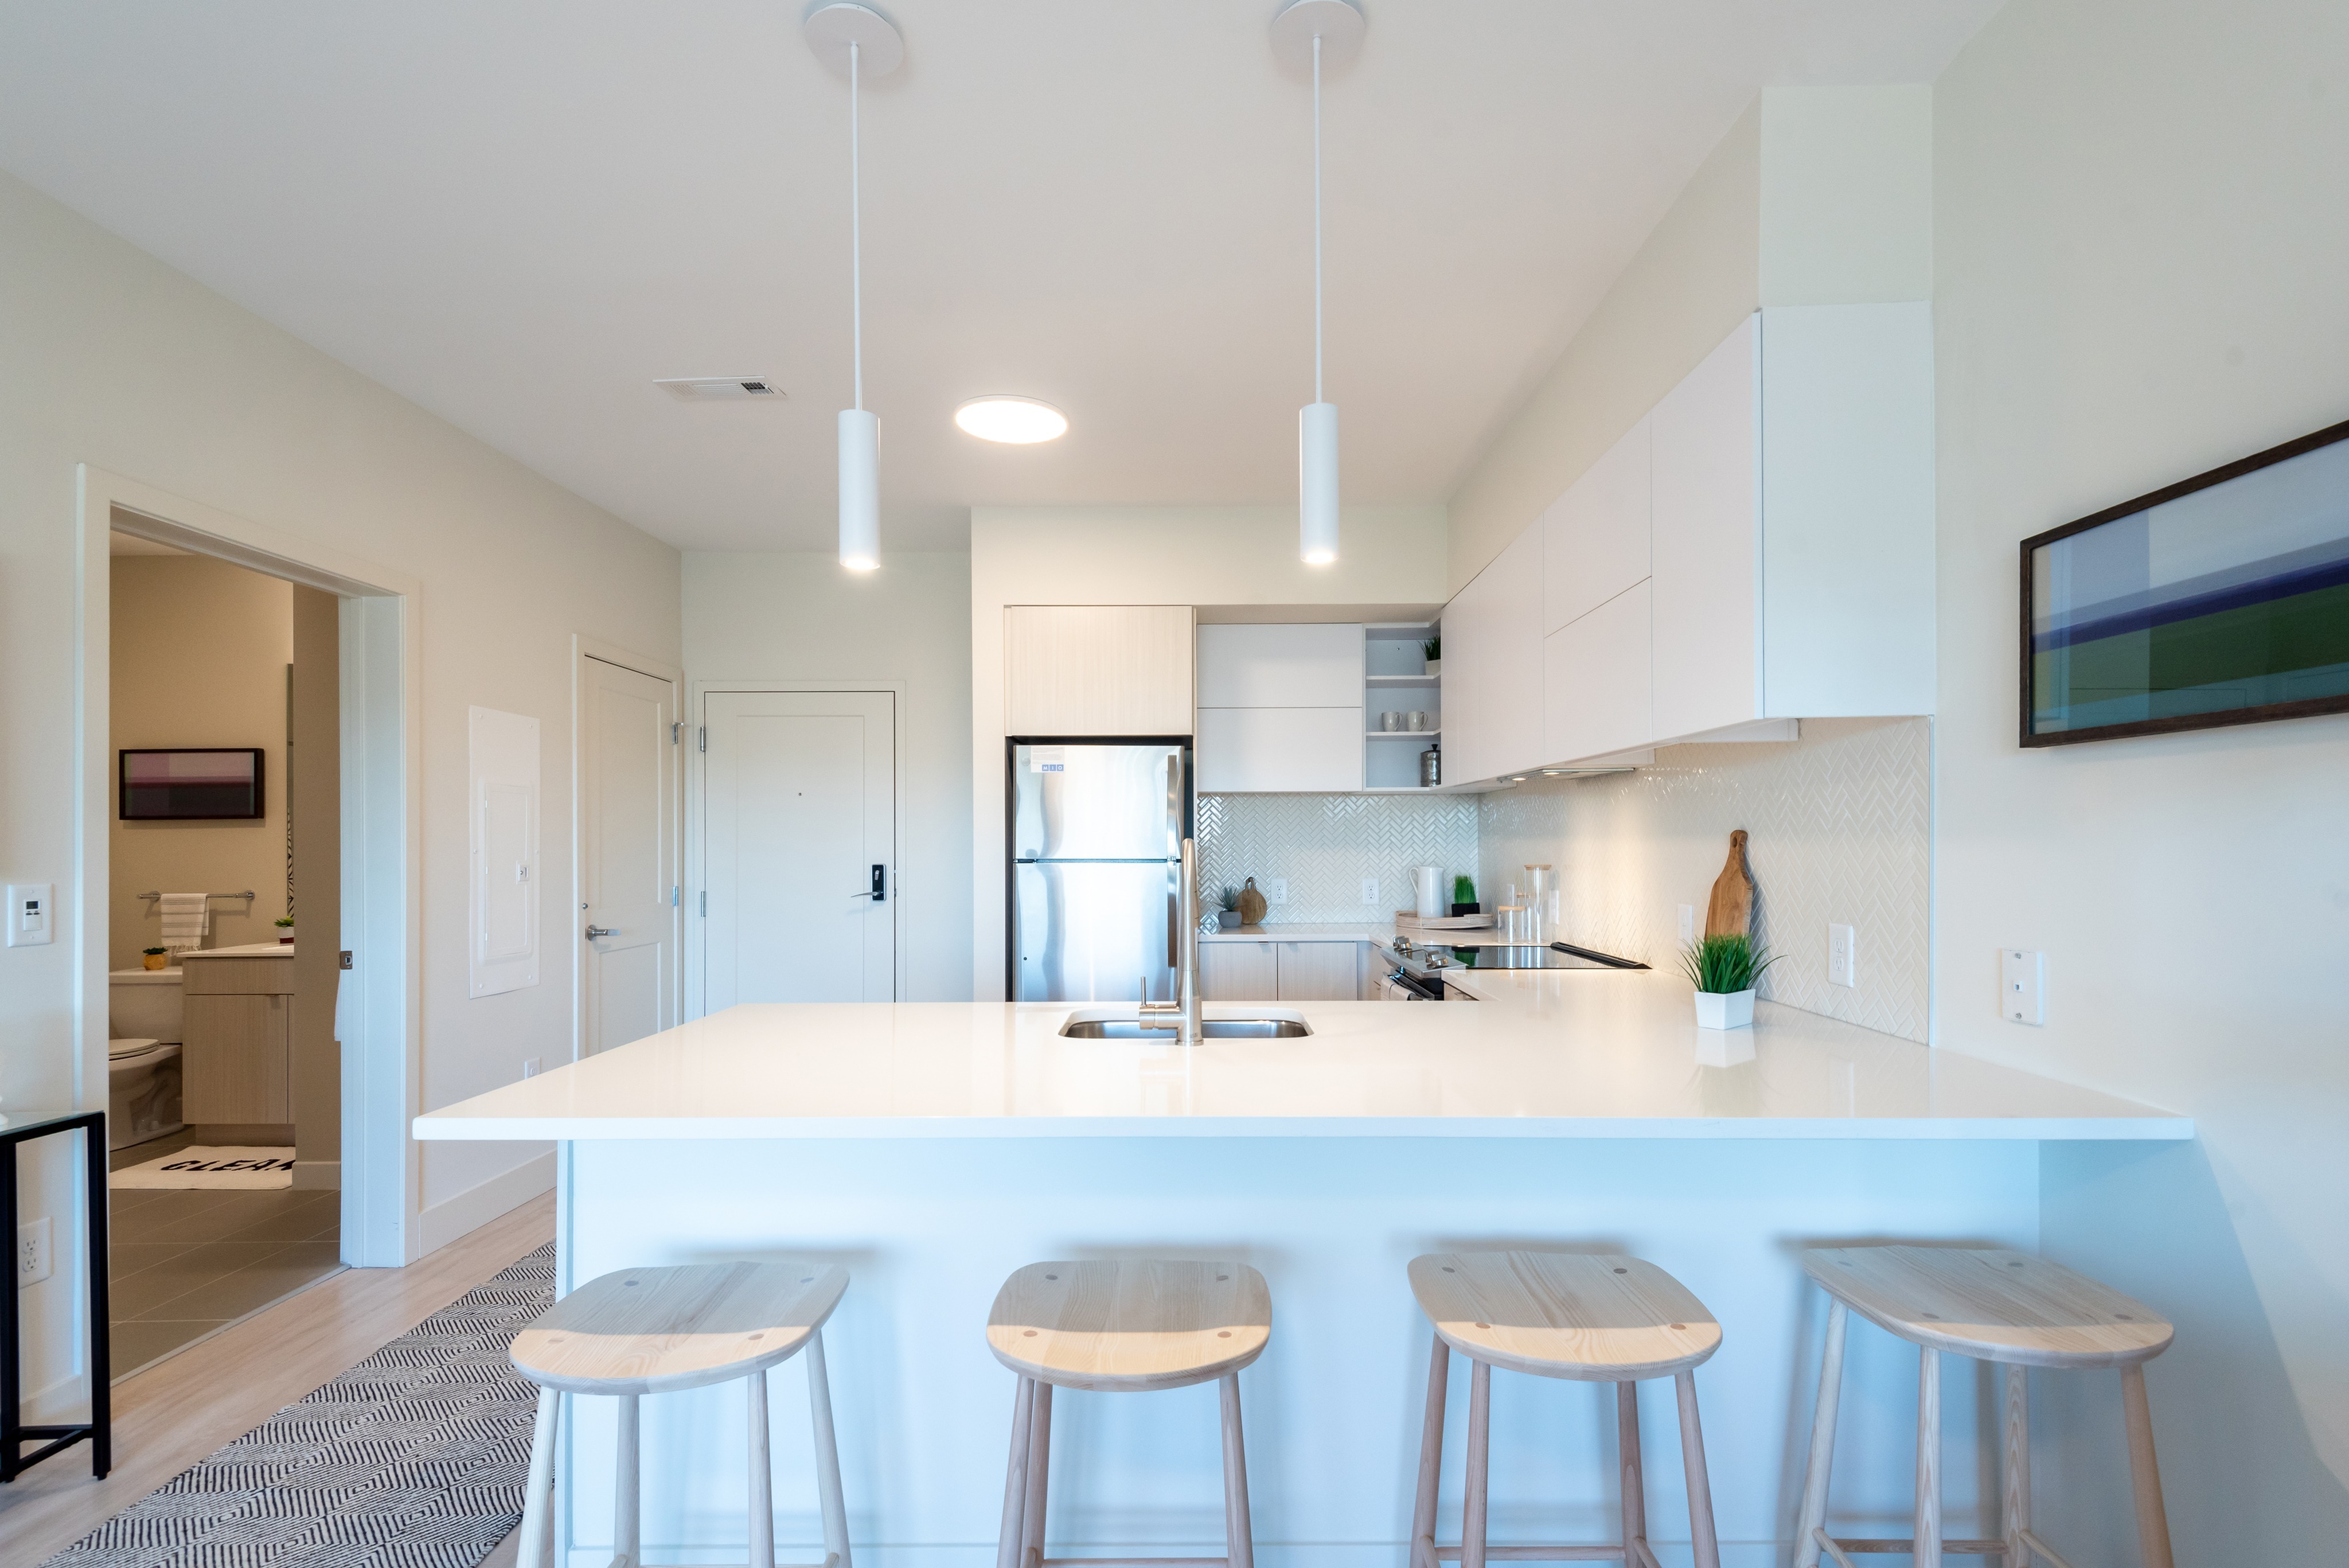 Apartment Kitchen with Breakfast Bar and Pendant Lights